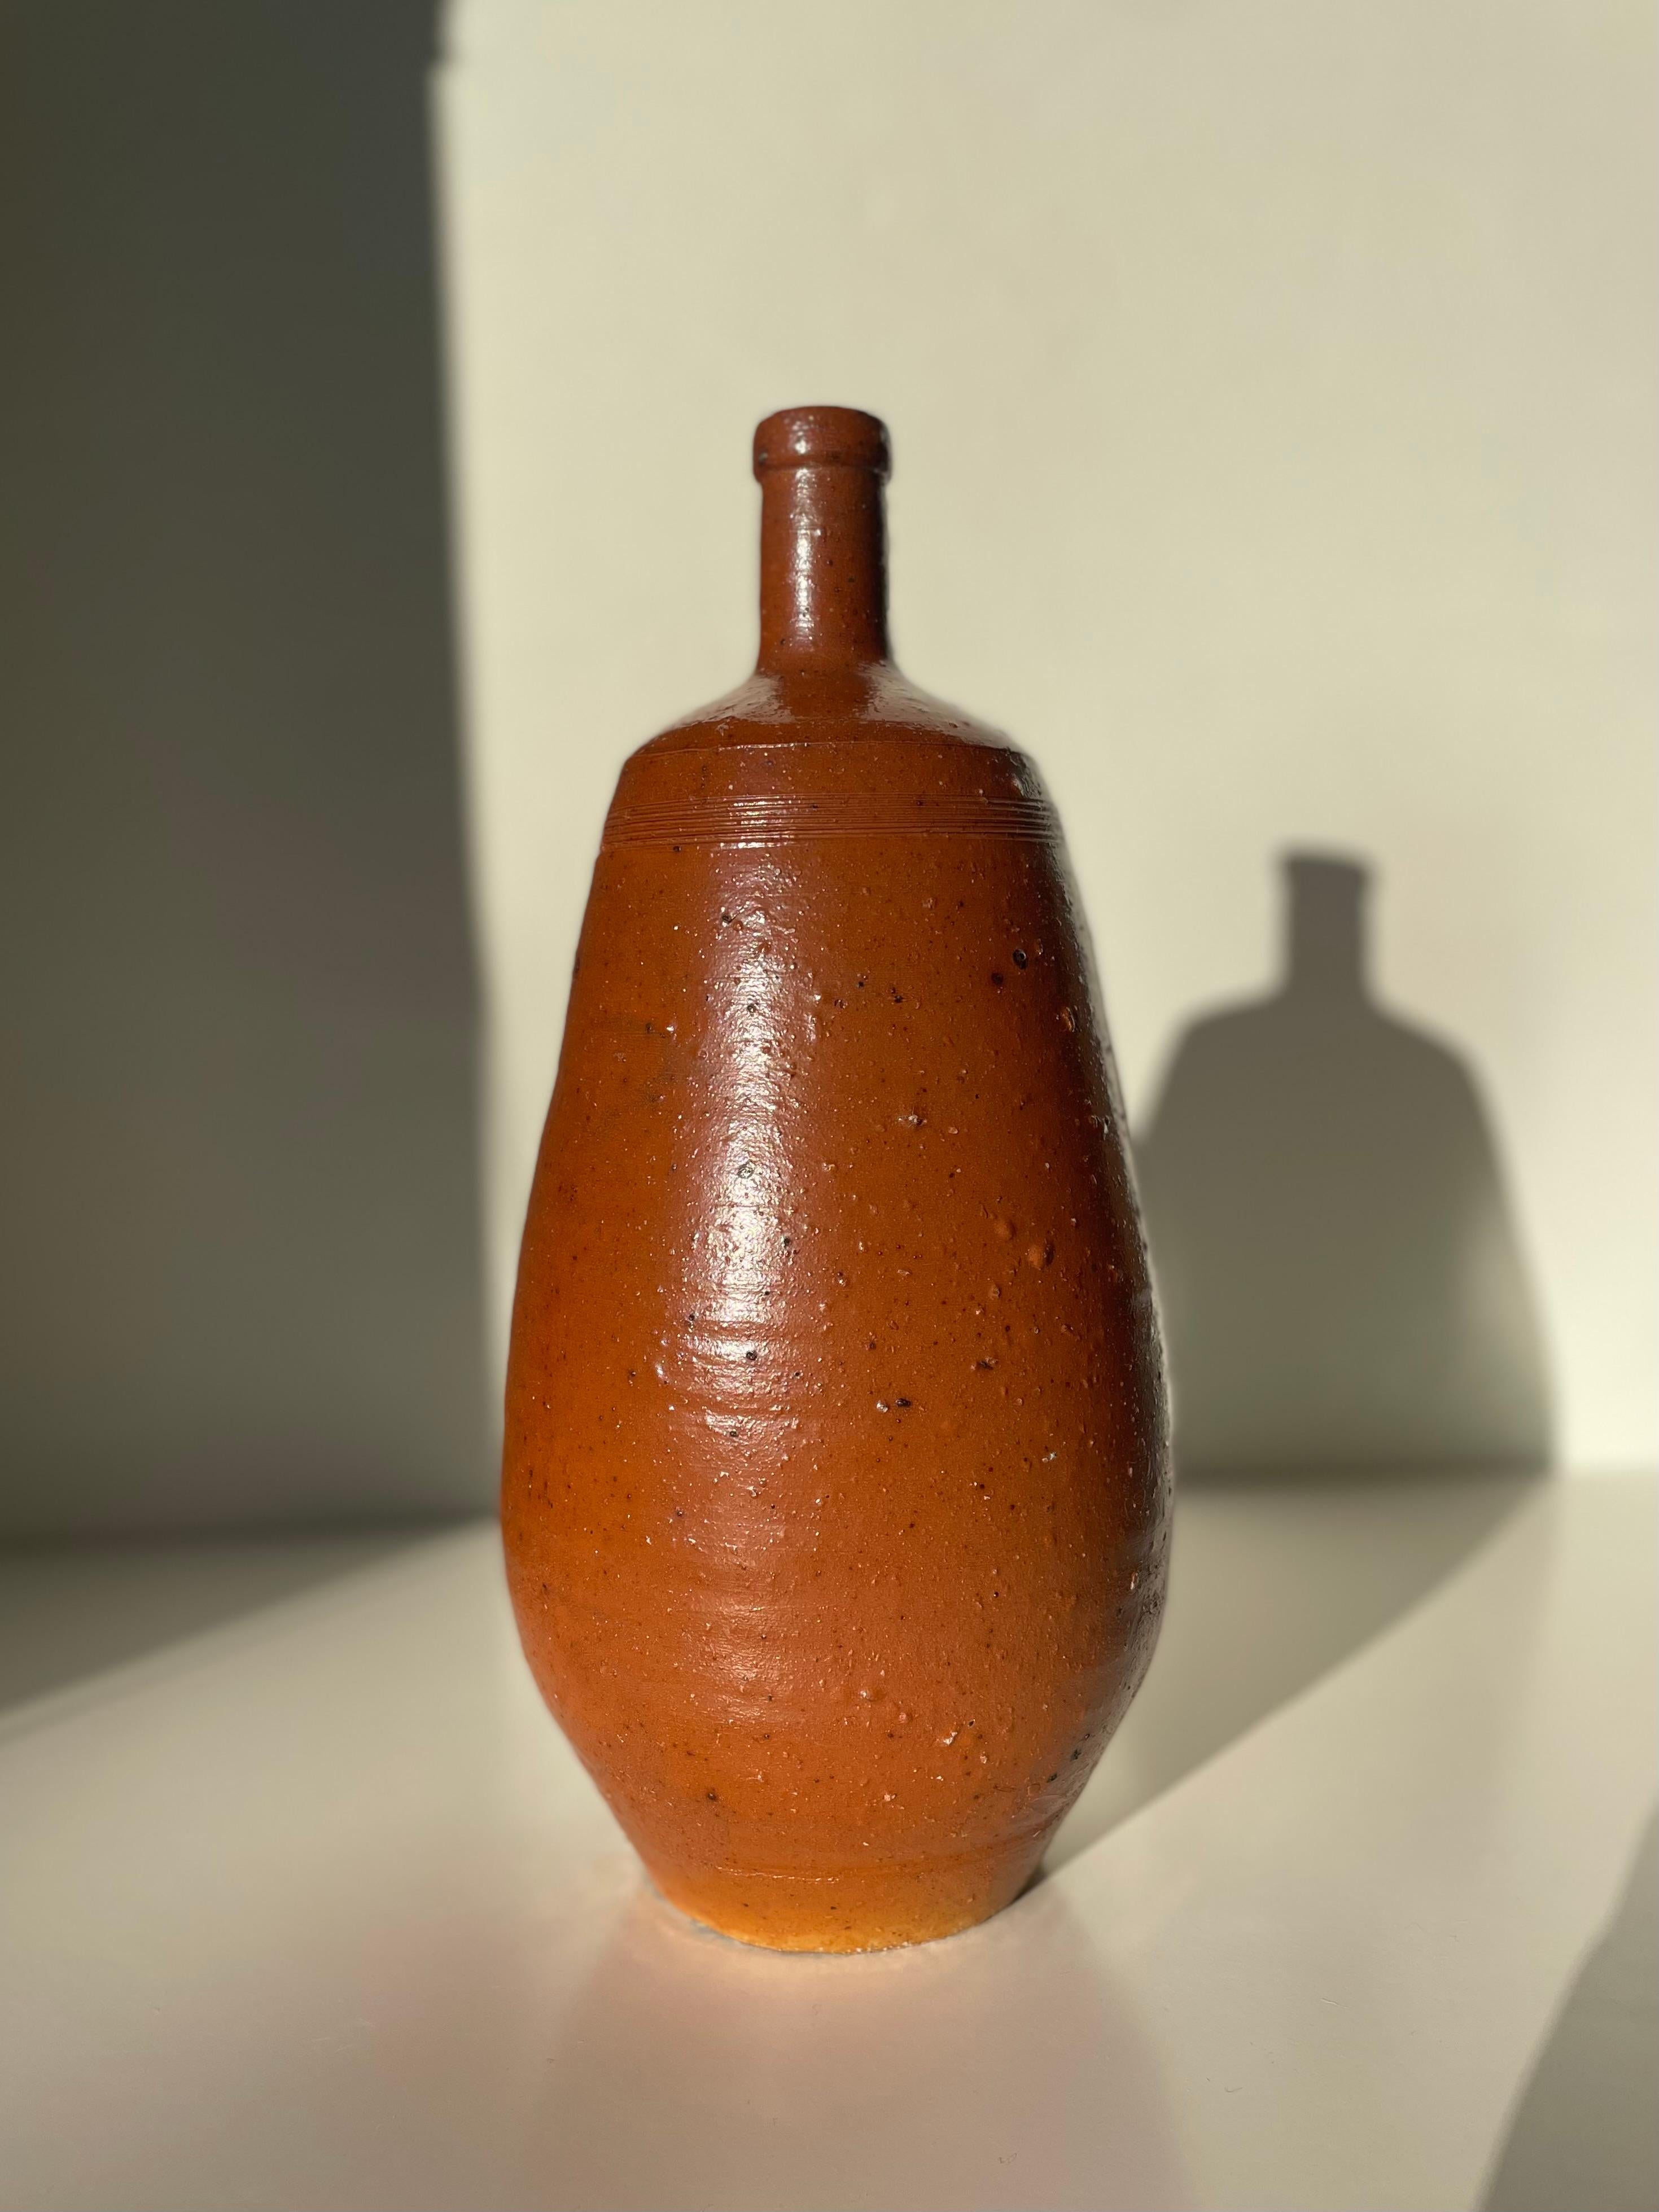 Rustic French ceramic bottle vase with warm caramel and burnt umber colored glaze. Fine horisontal lines around the neck. Great vintage condition. 
France, circa 1930s. 